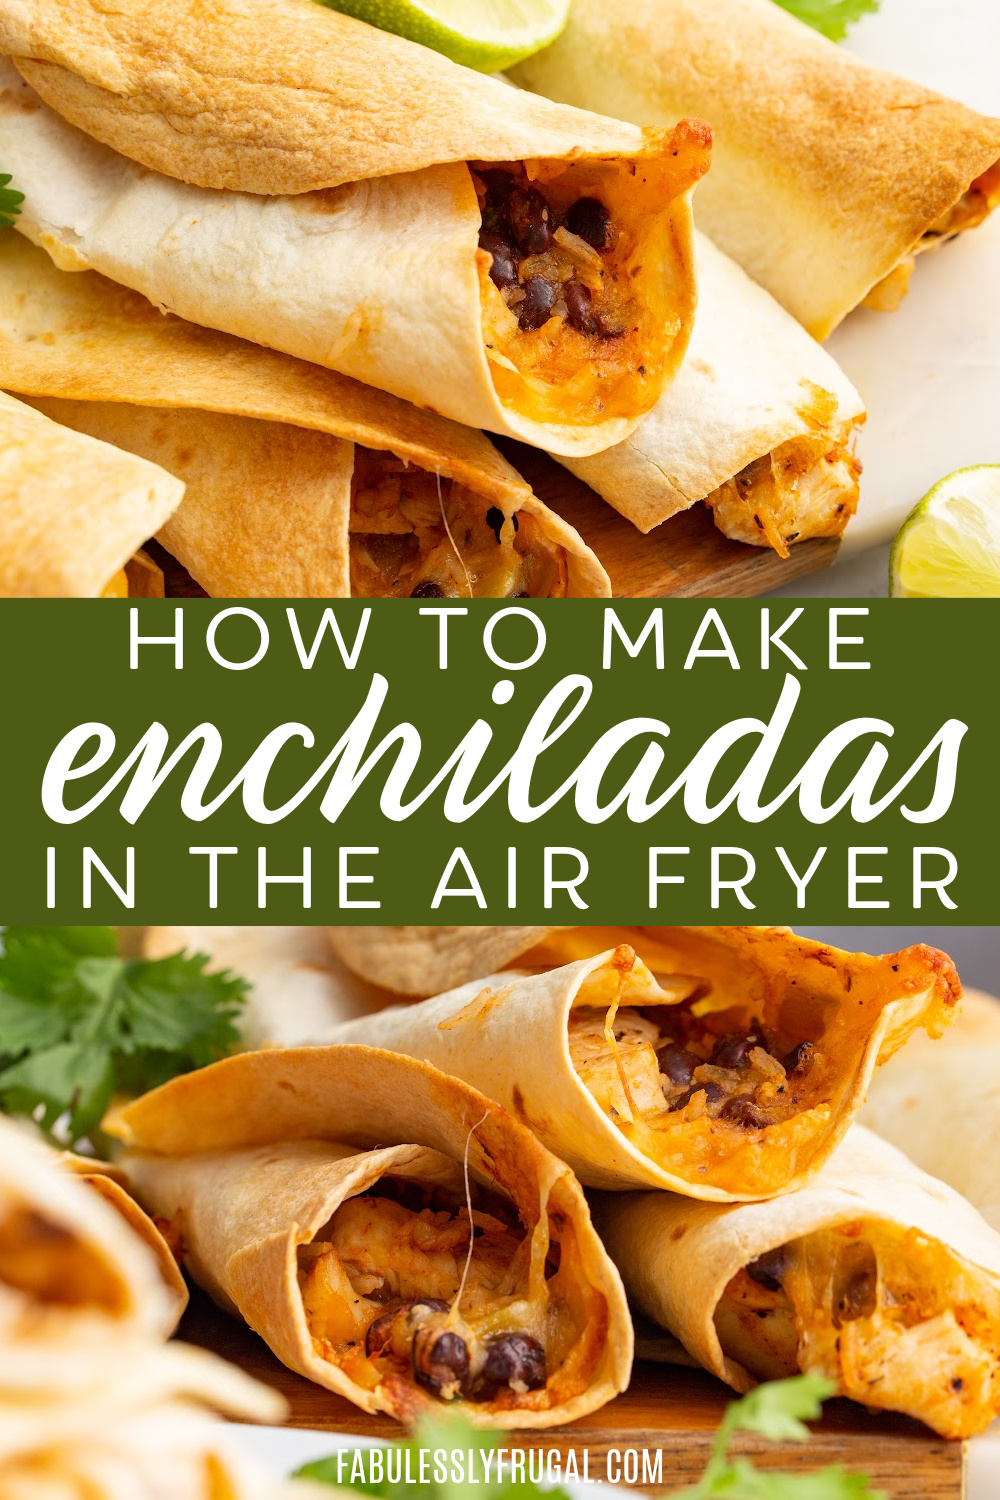 how to make enchiladas in the air fryer